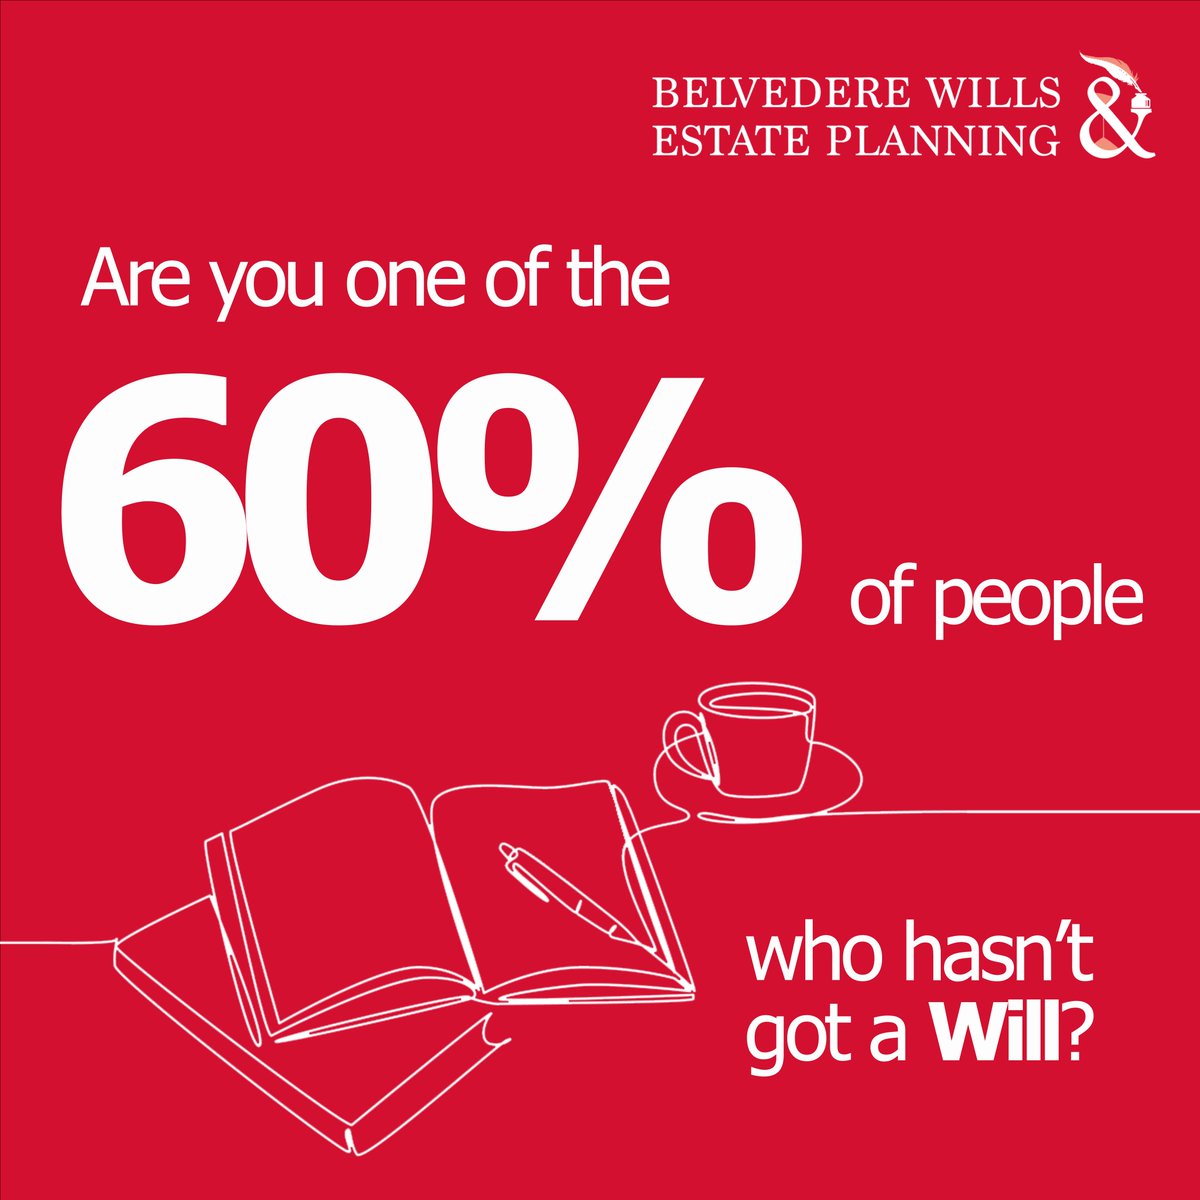 Did you know that a staggering 60% of adults in the UK haven't made a Will?
Take charge of your legacy for your loved ones.
Get your Will in place bit.ly/3rcLLyj 

#willwriting #belvederewills #estateplanner #inheritancerights #estateplanningtips #willwritingservice